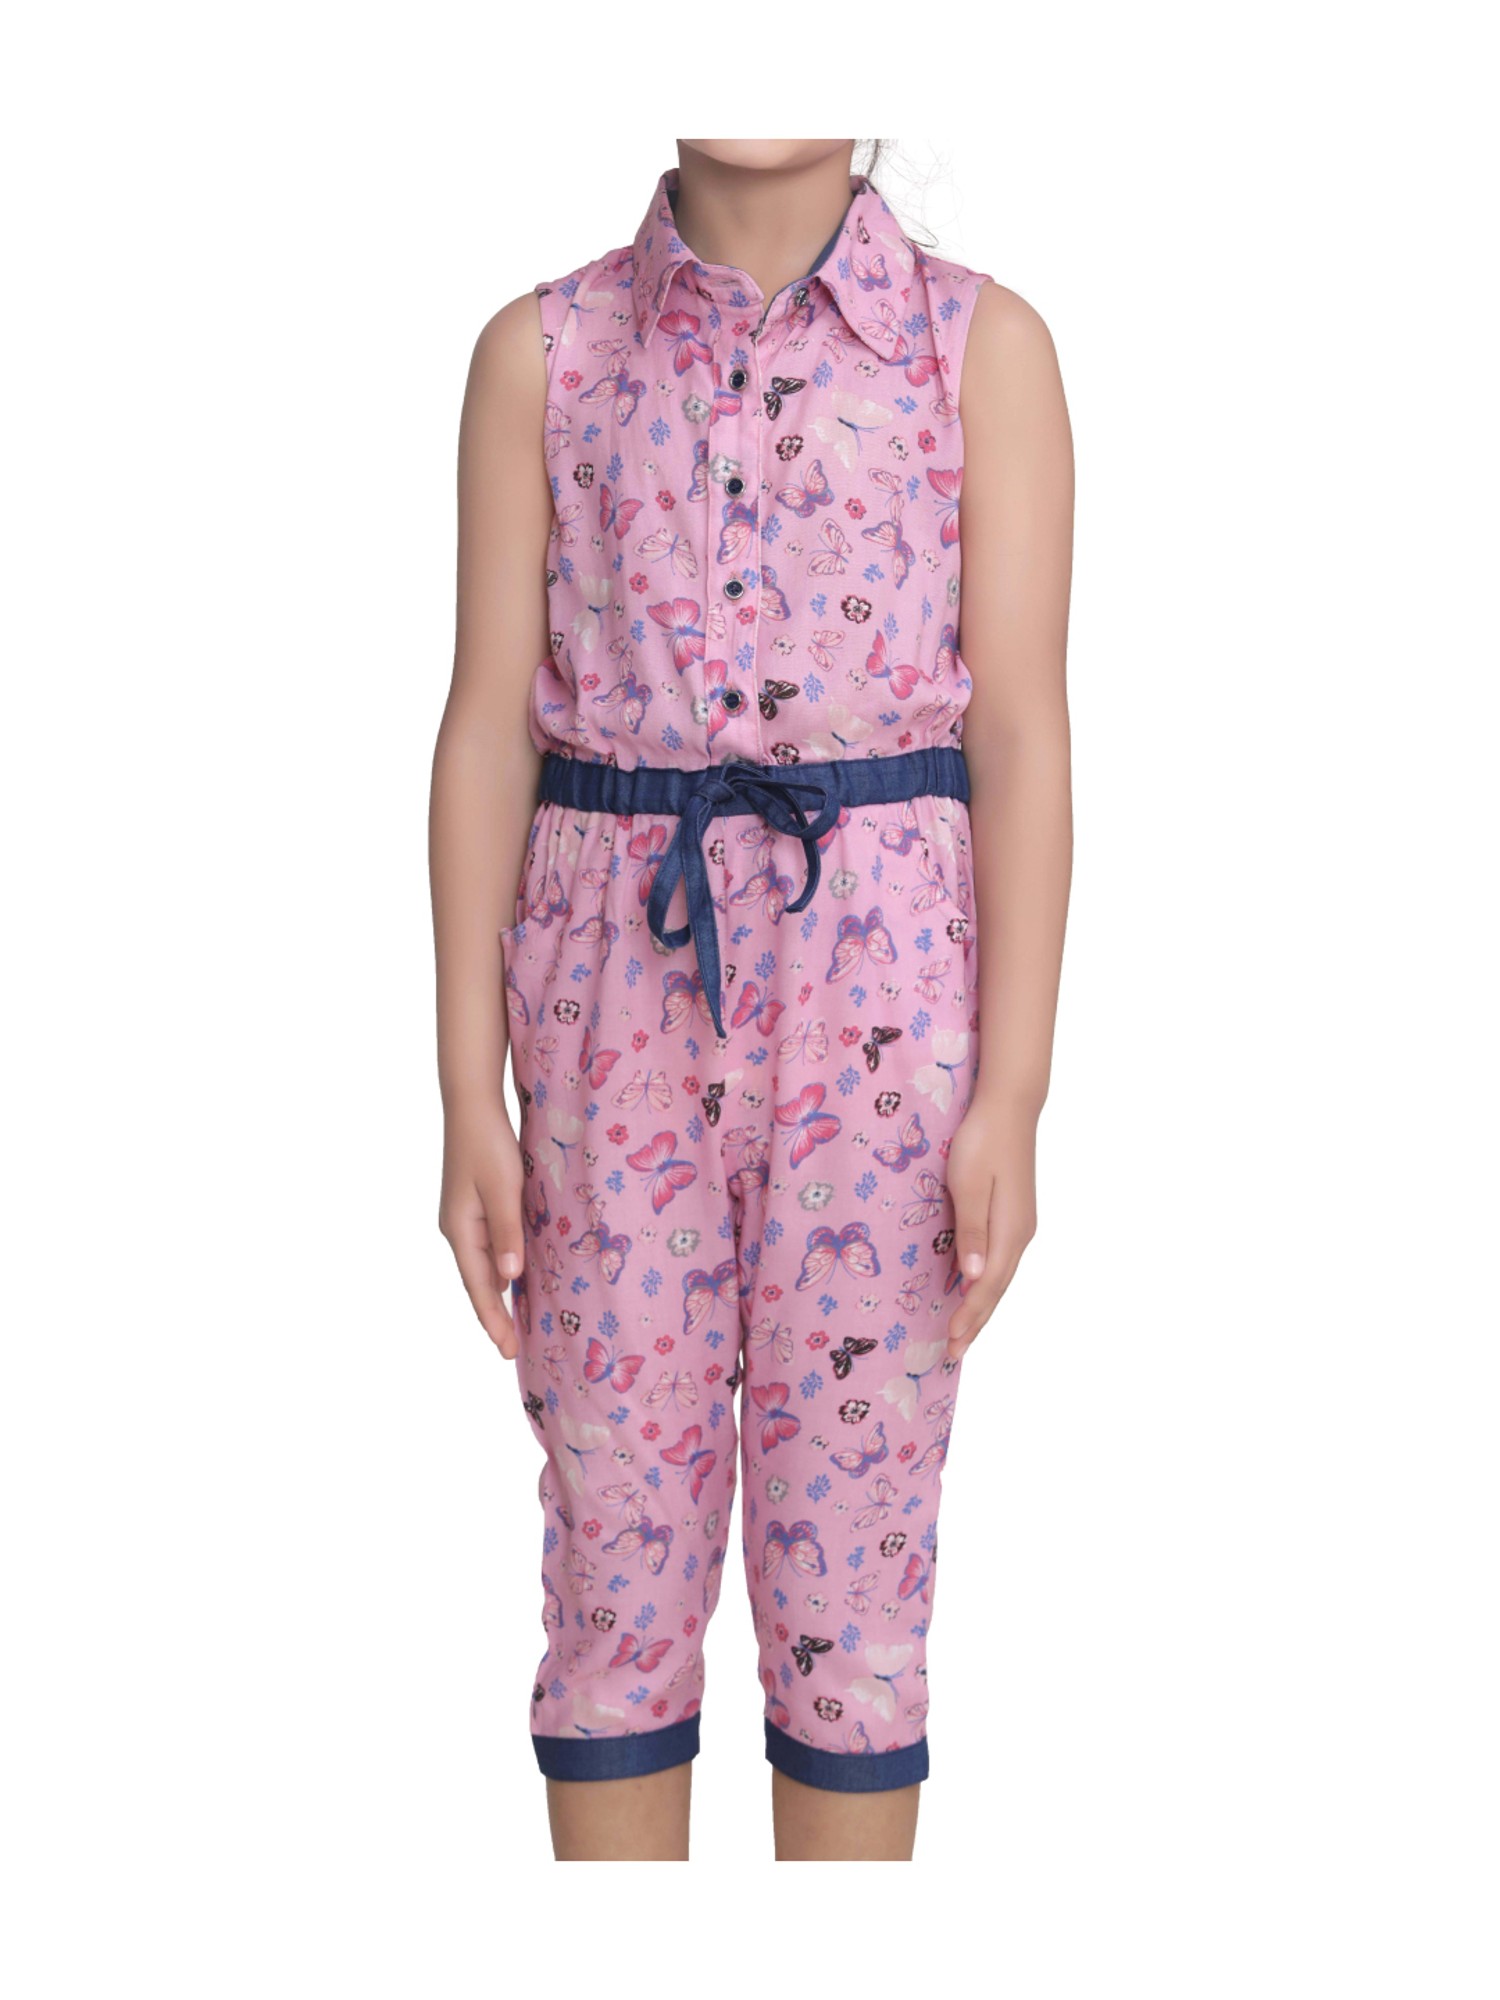 girls fat face jumpsuit age 10-11 years blue | eBay